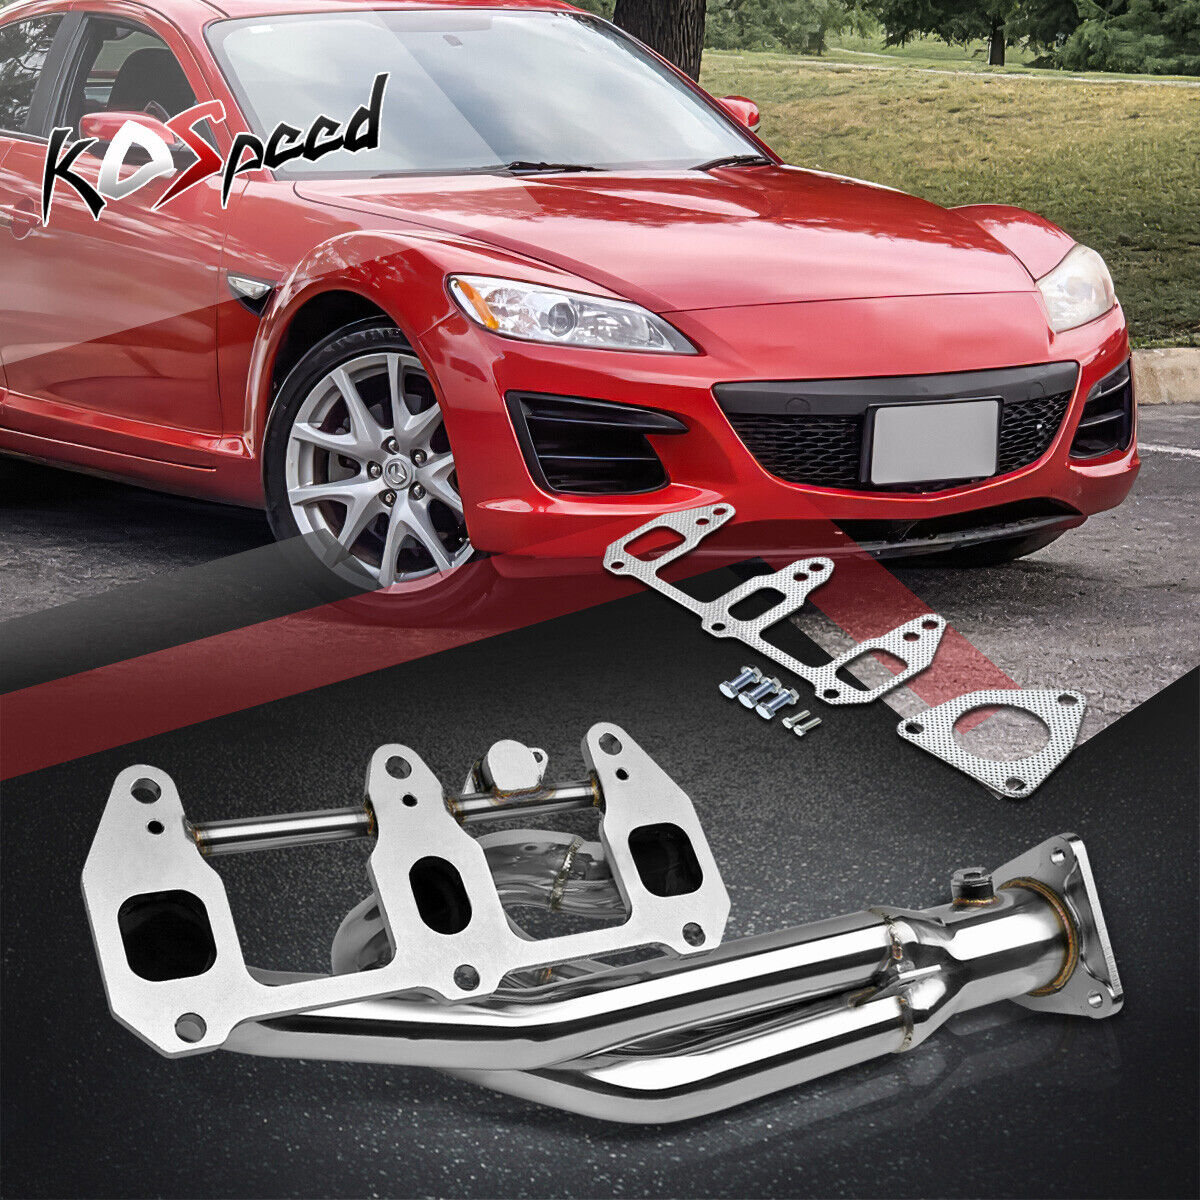 STAINLESS STEEL SS RACING EXHAUST HEADER/MANIFOLD 03-10 MAZDA RX8 SE3P JMZSE JDM